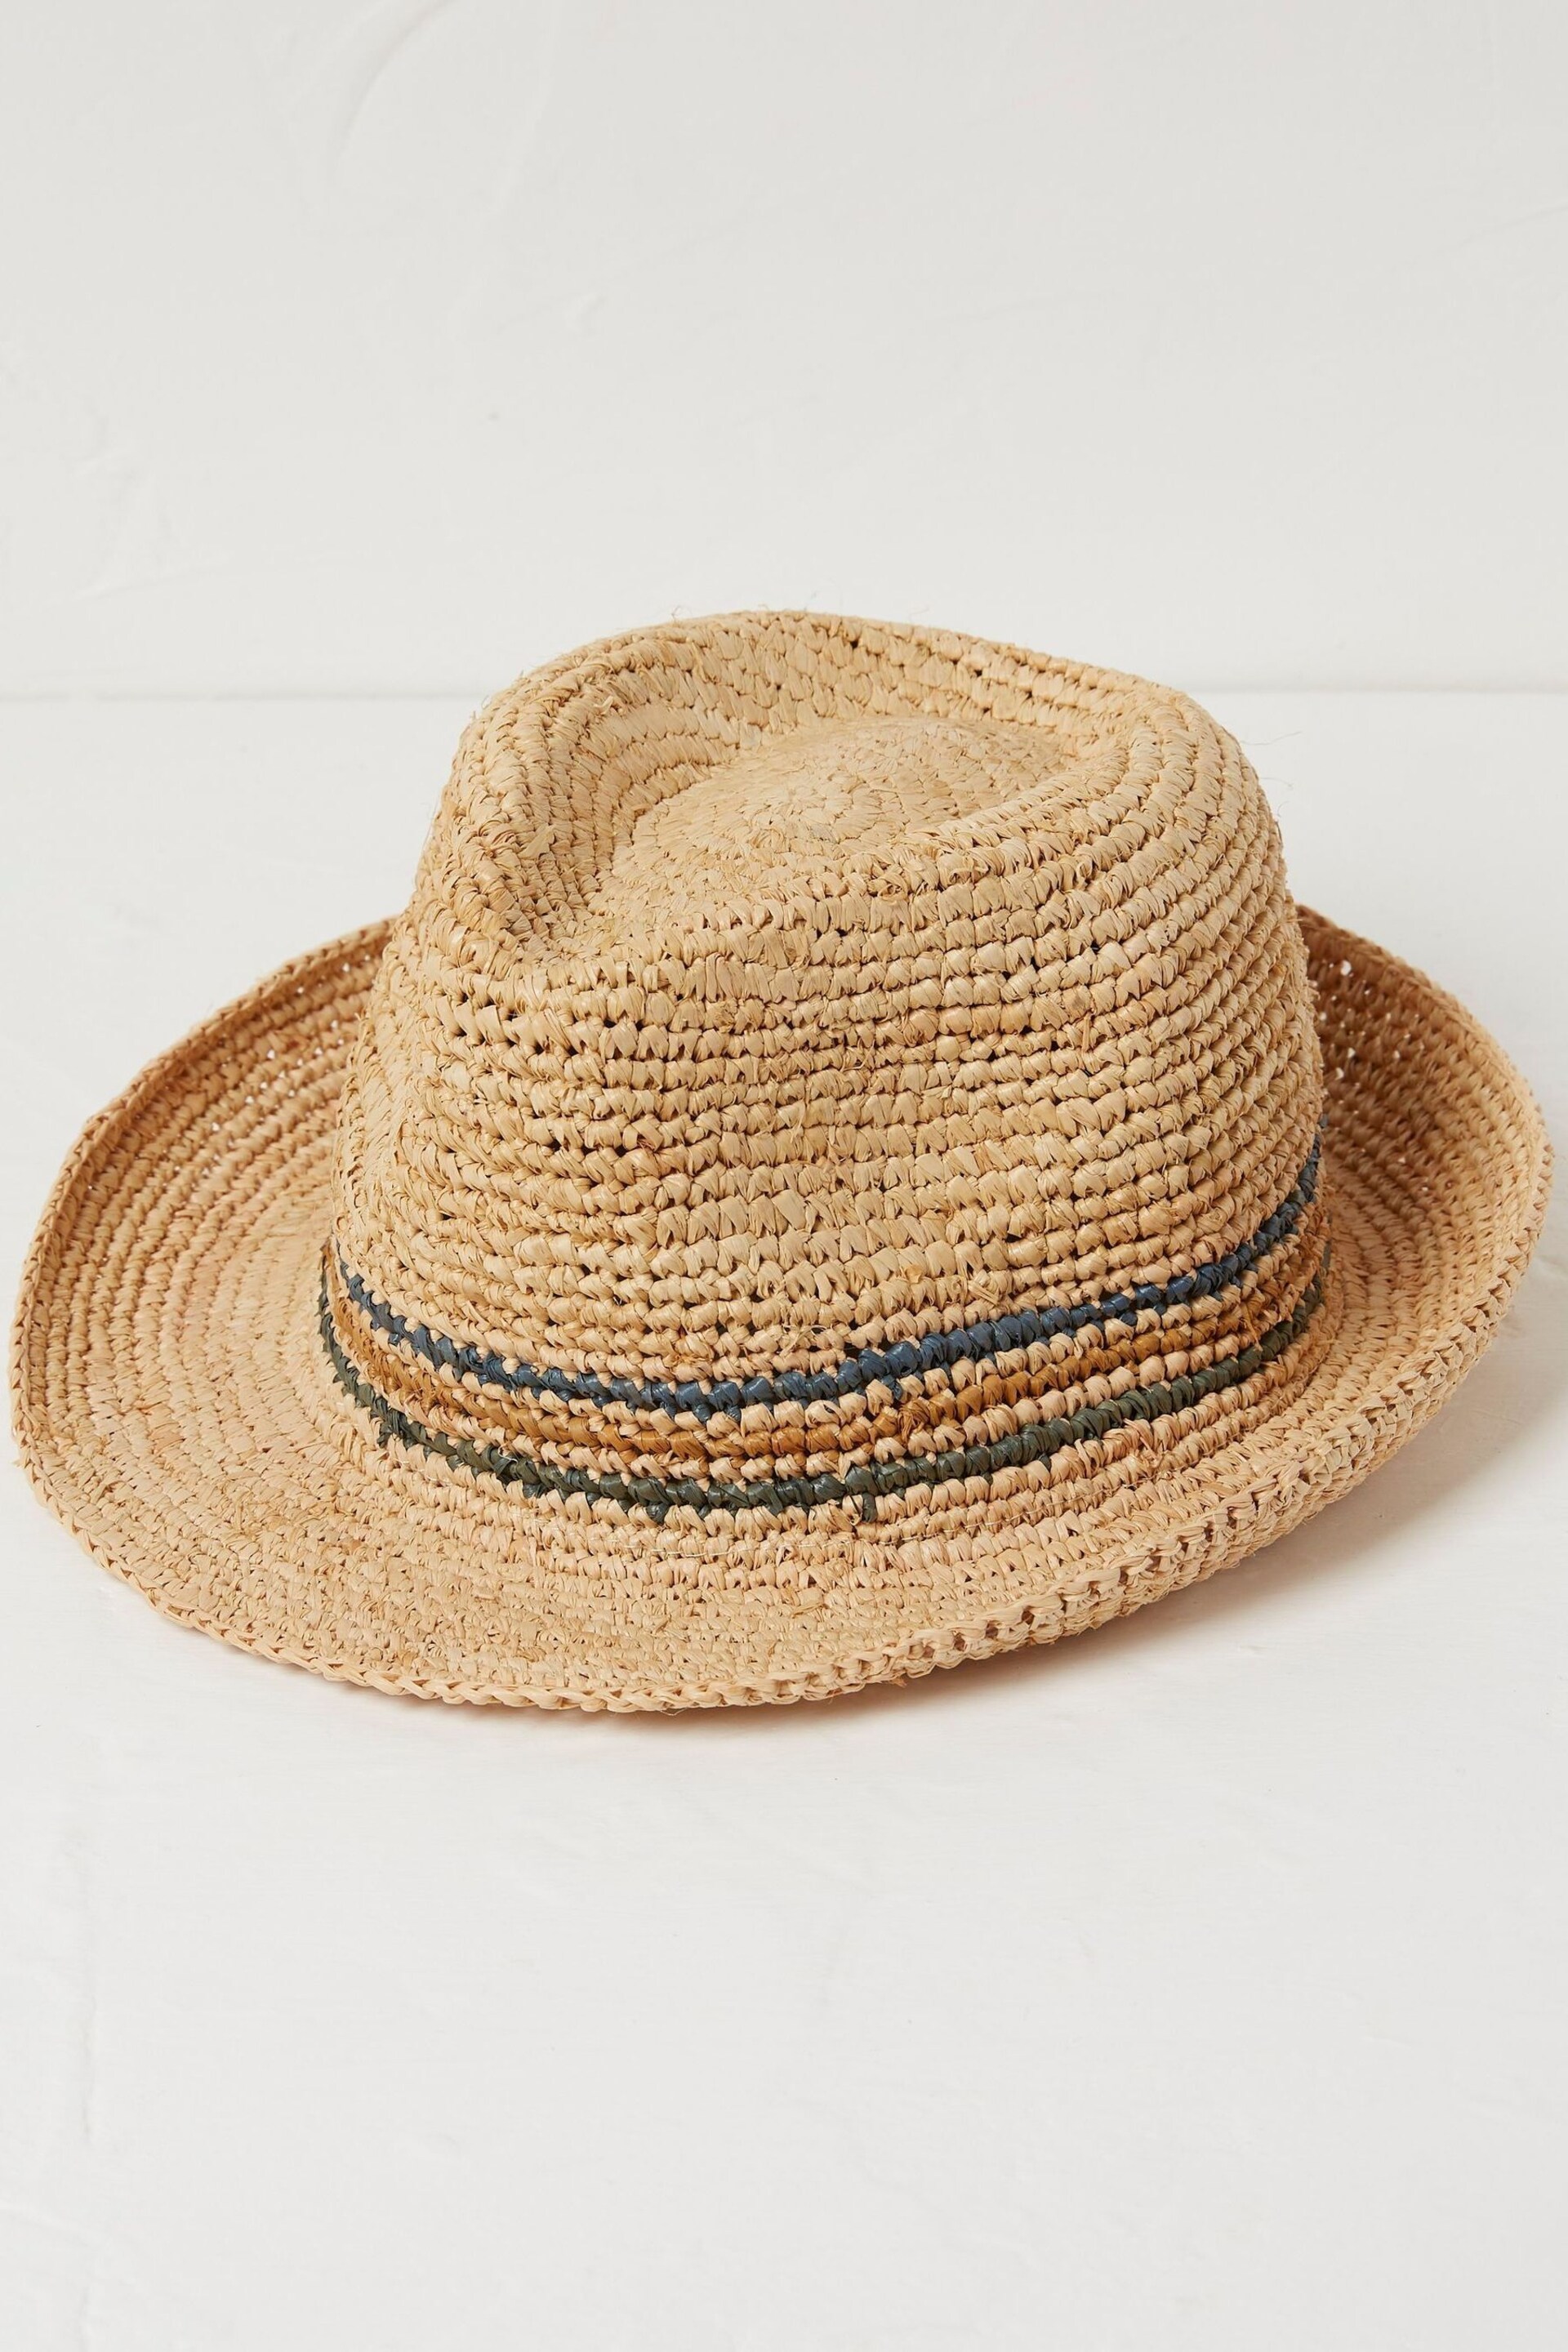 FatFace Natural Stripe Trilby Hat - Image 1 of 2